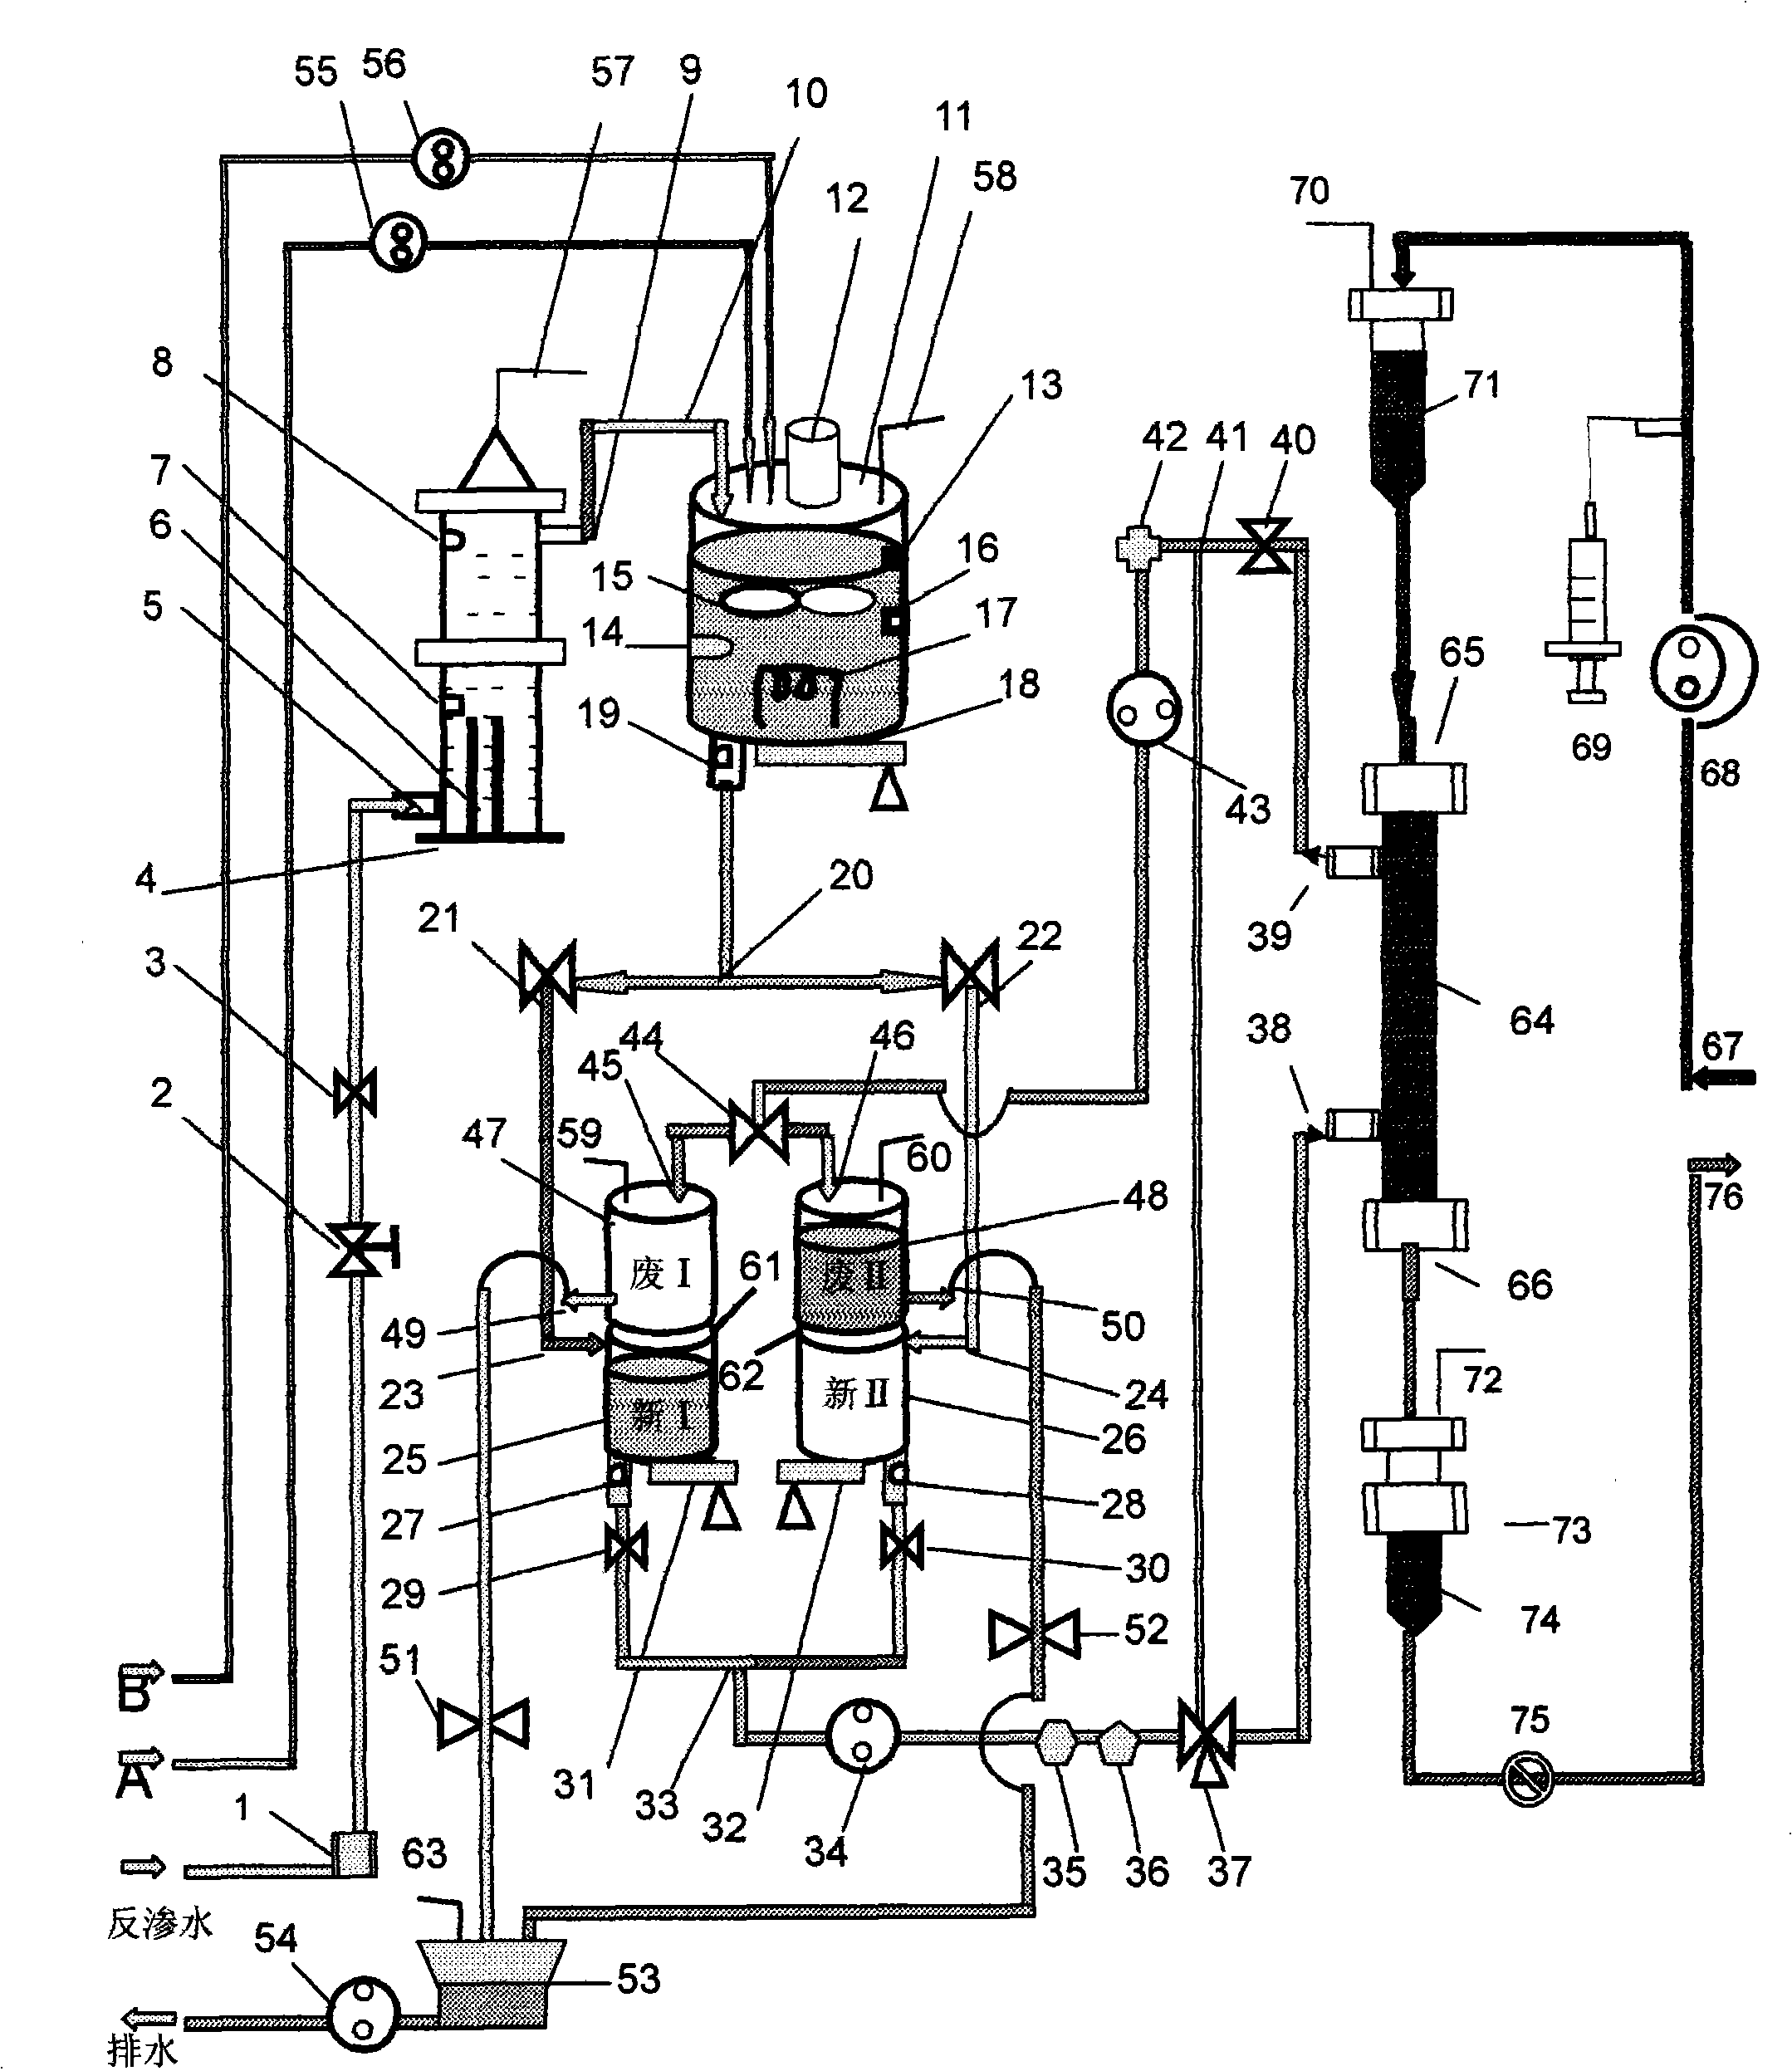 Hemodialysis system for controlling electric conduction and ultra-filtration by weighing